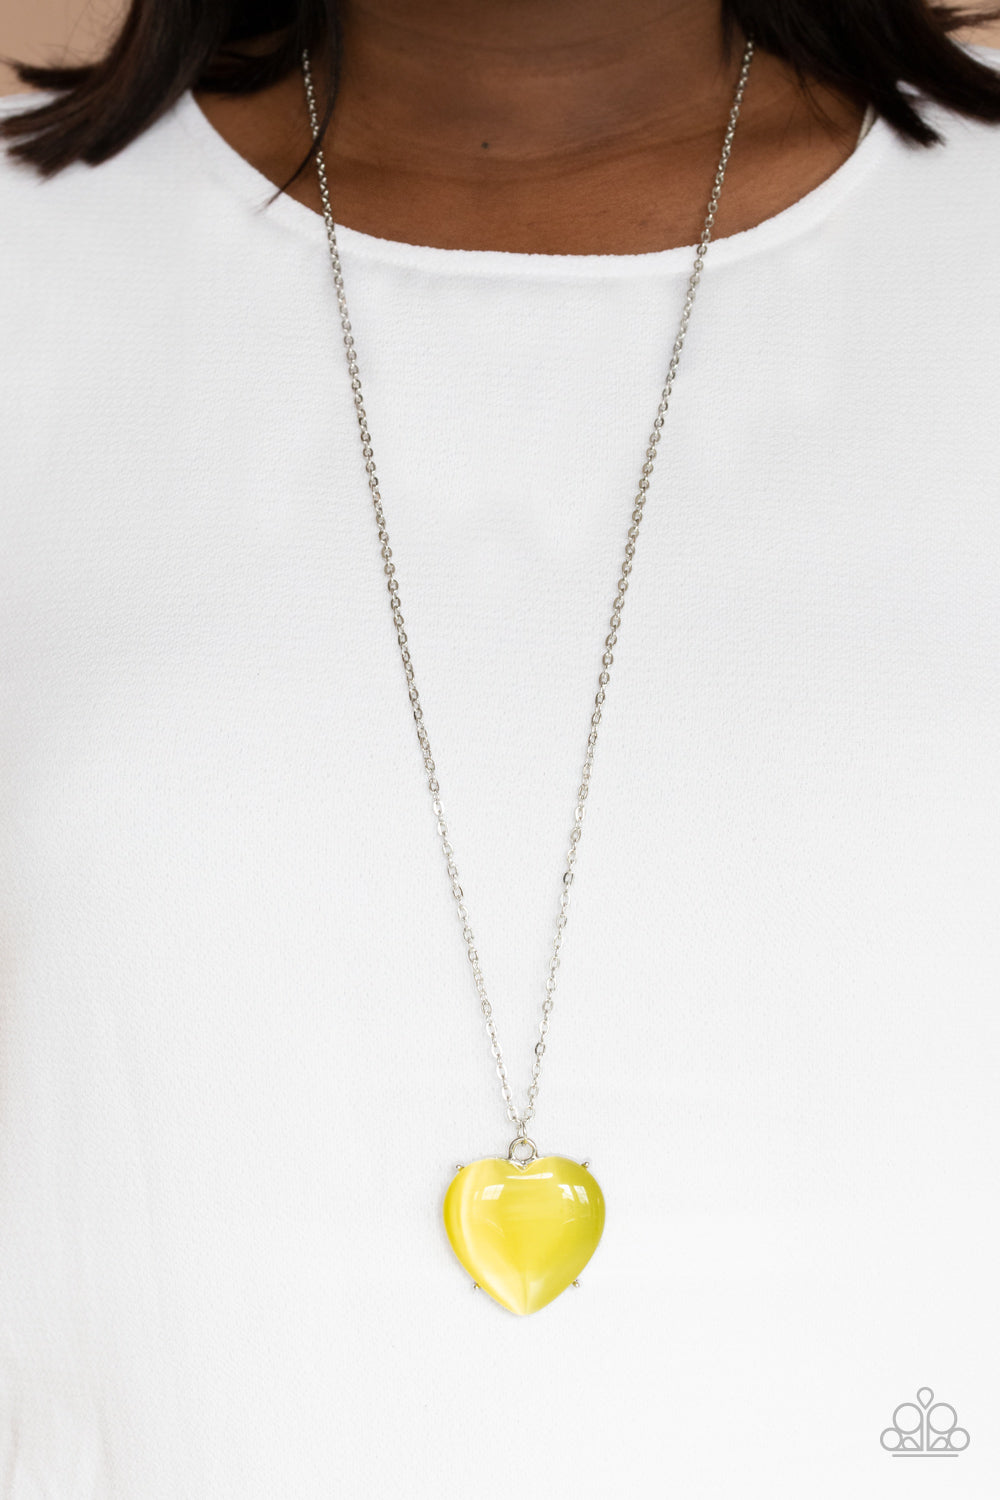 Paparazzi Necklaces - Warmhearted Glow - Yellow